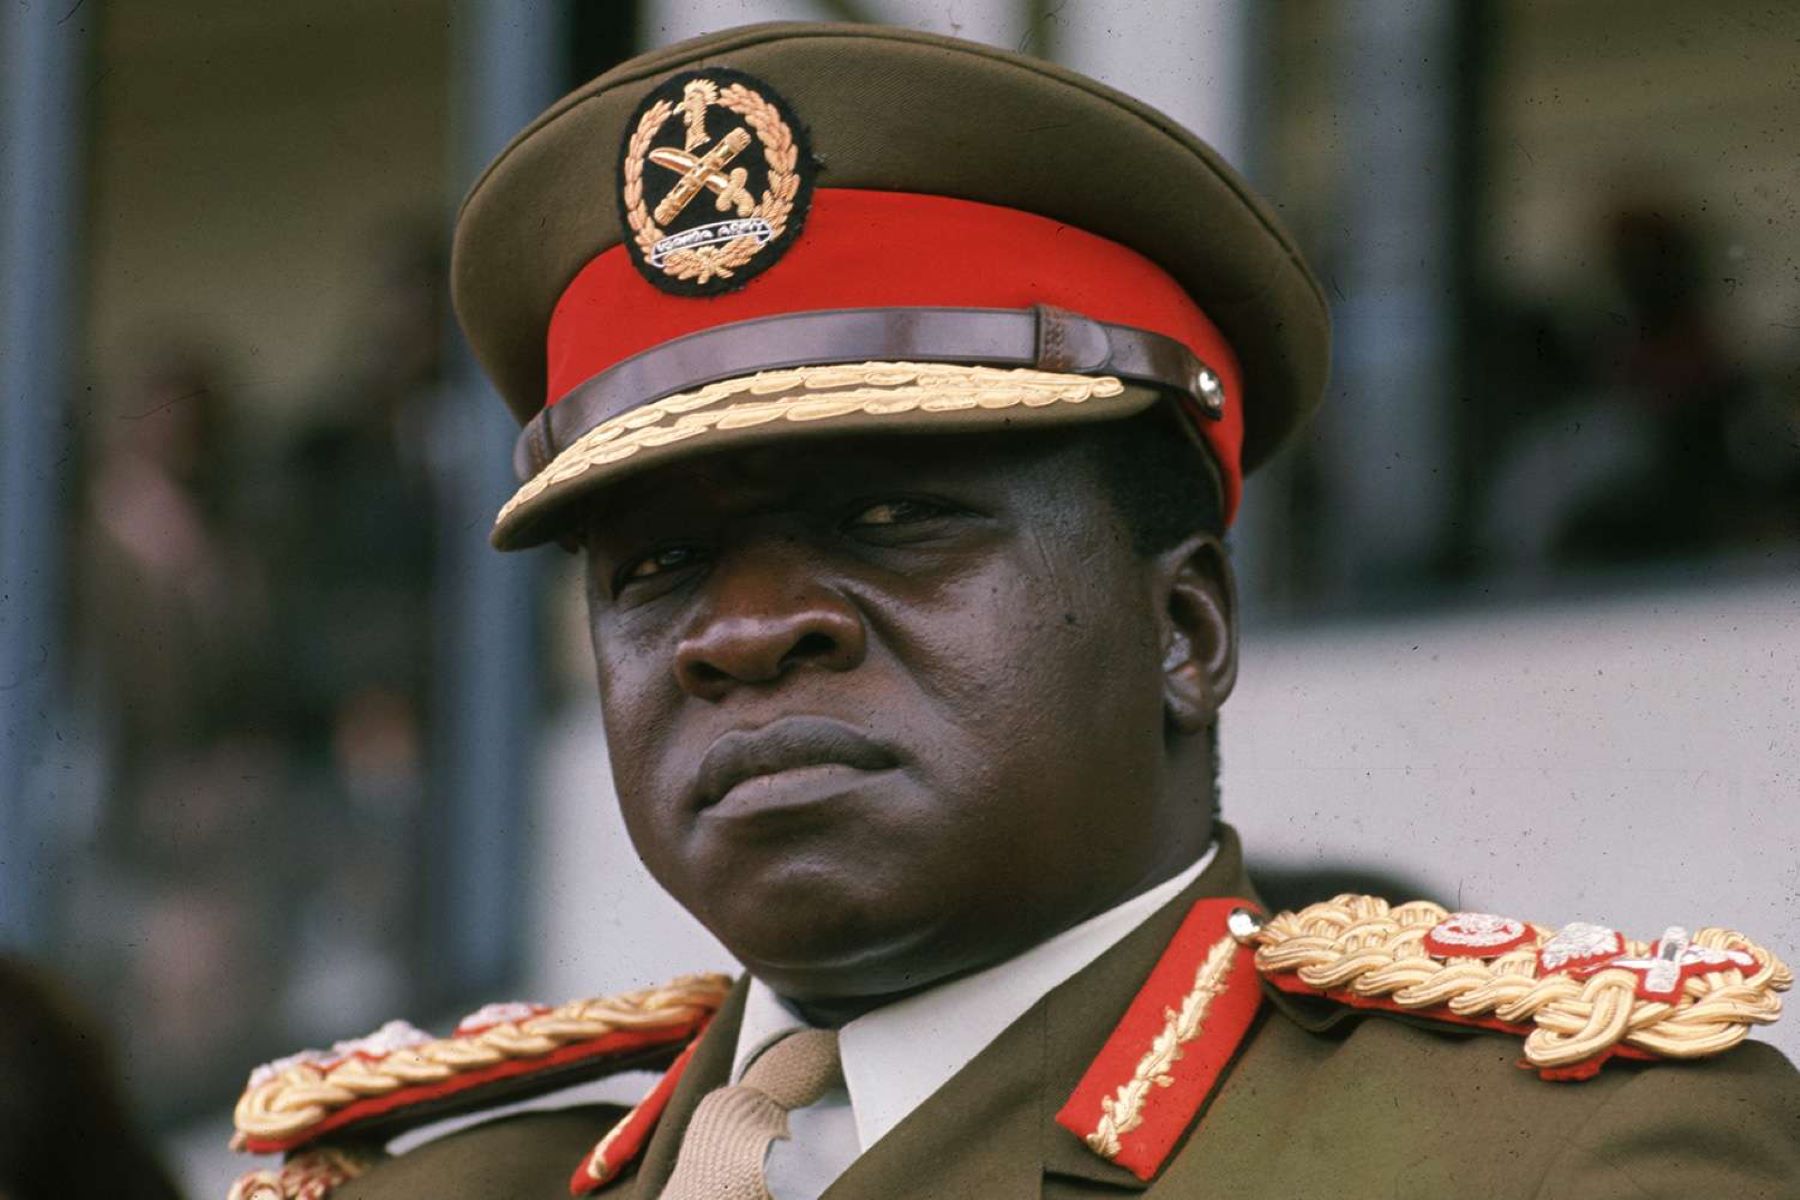 18-mind-blowing-facts-about-idi-amin-dada